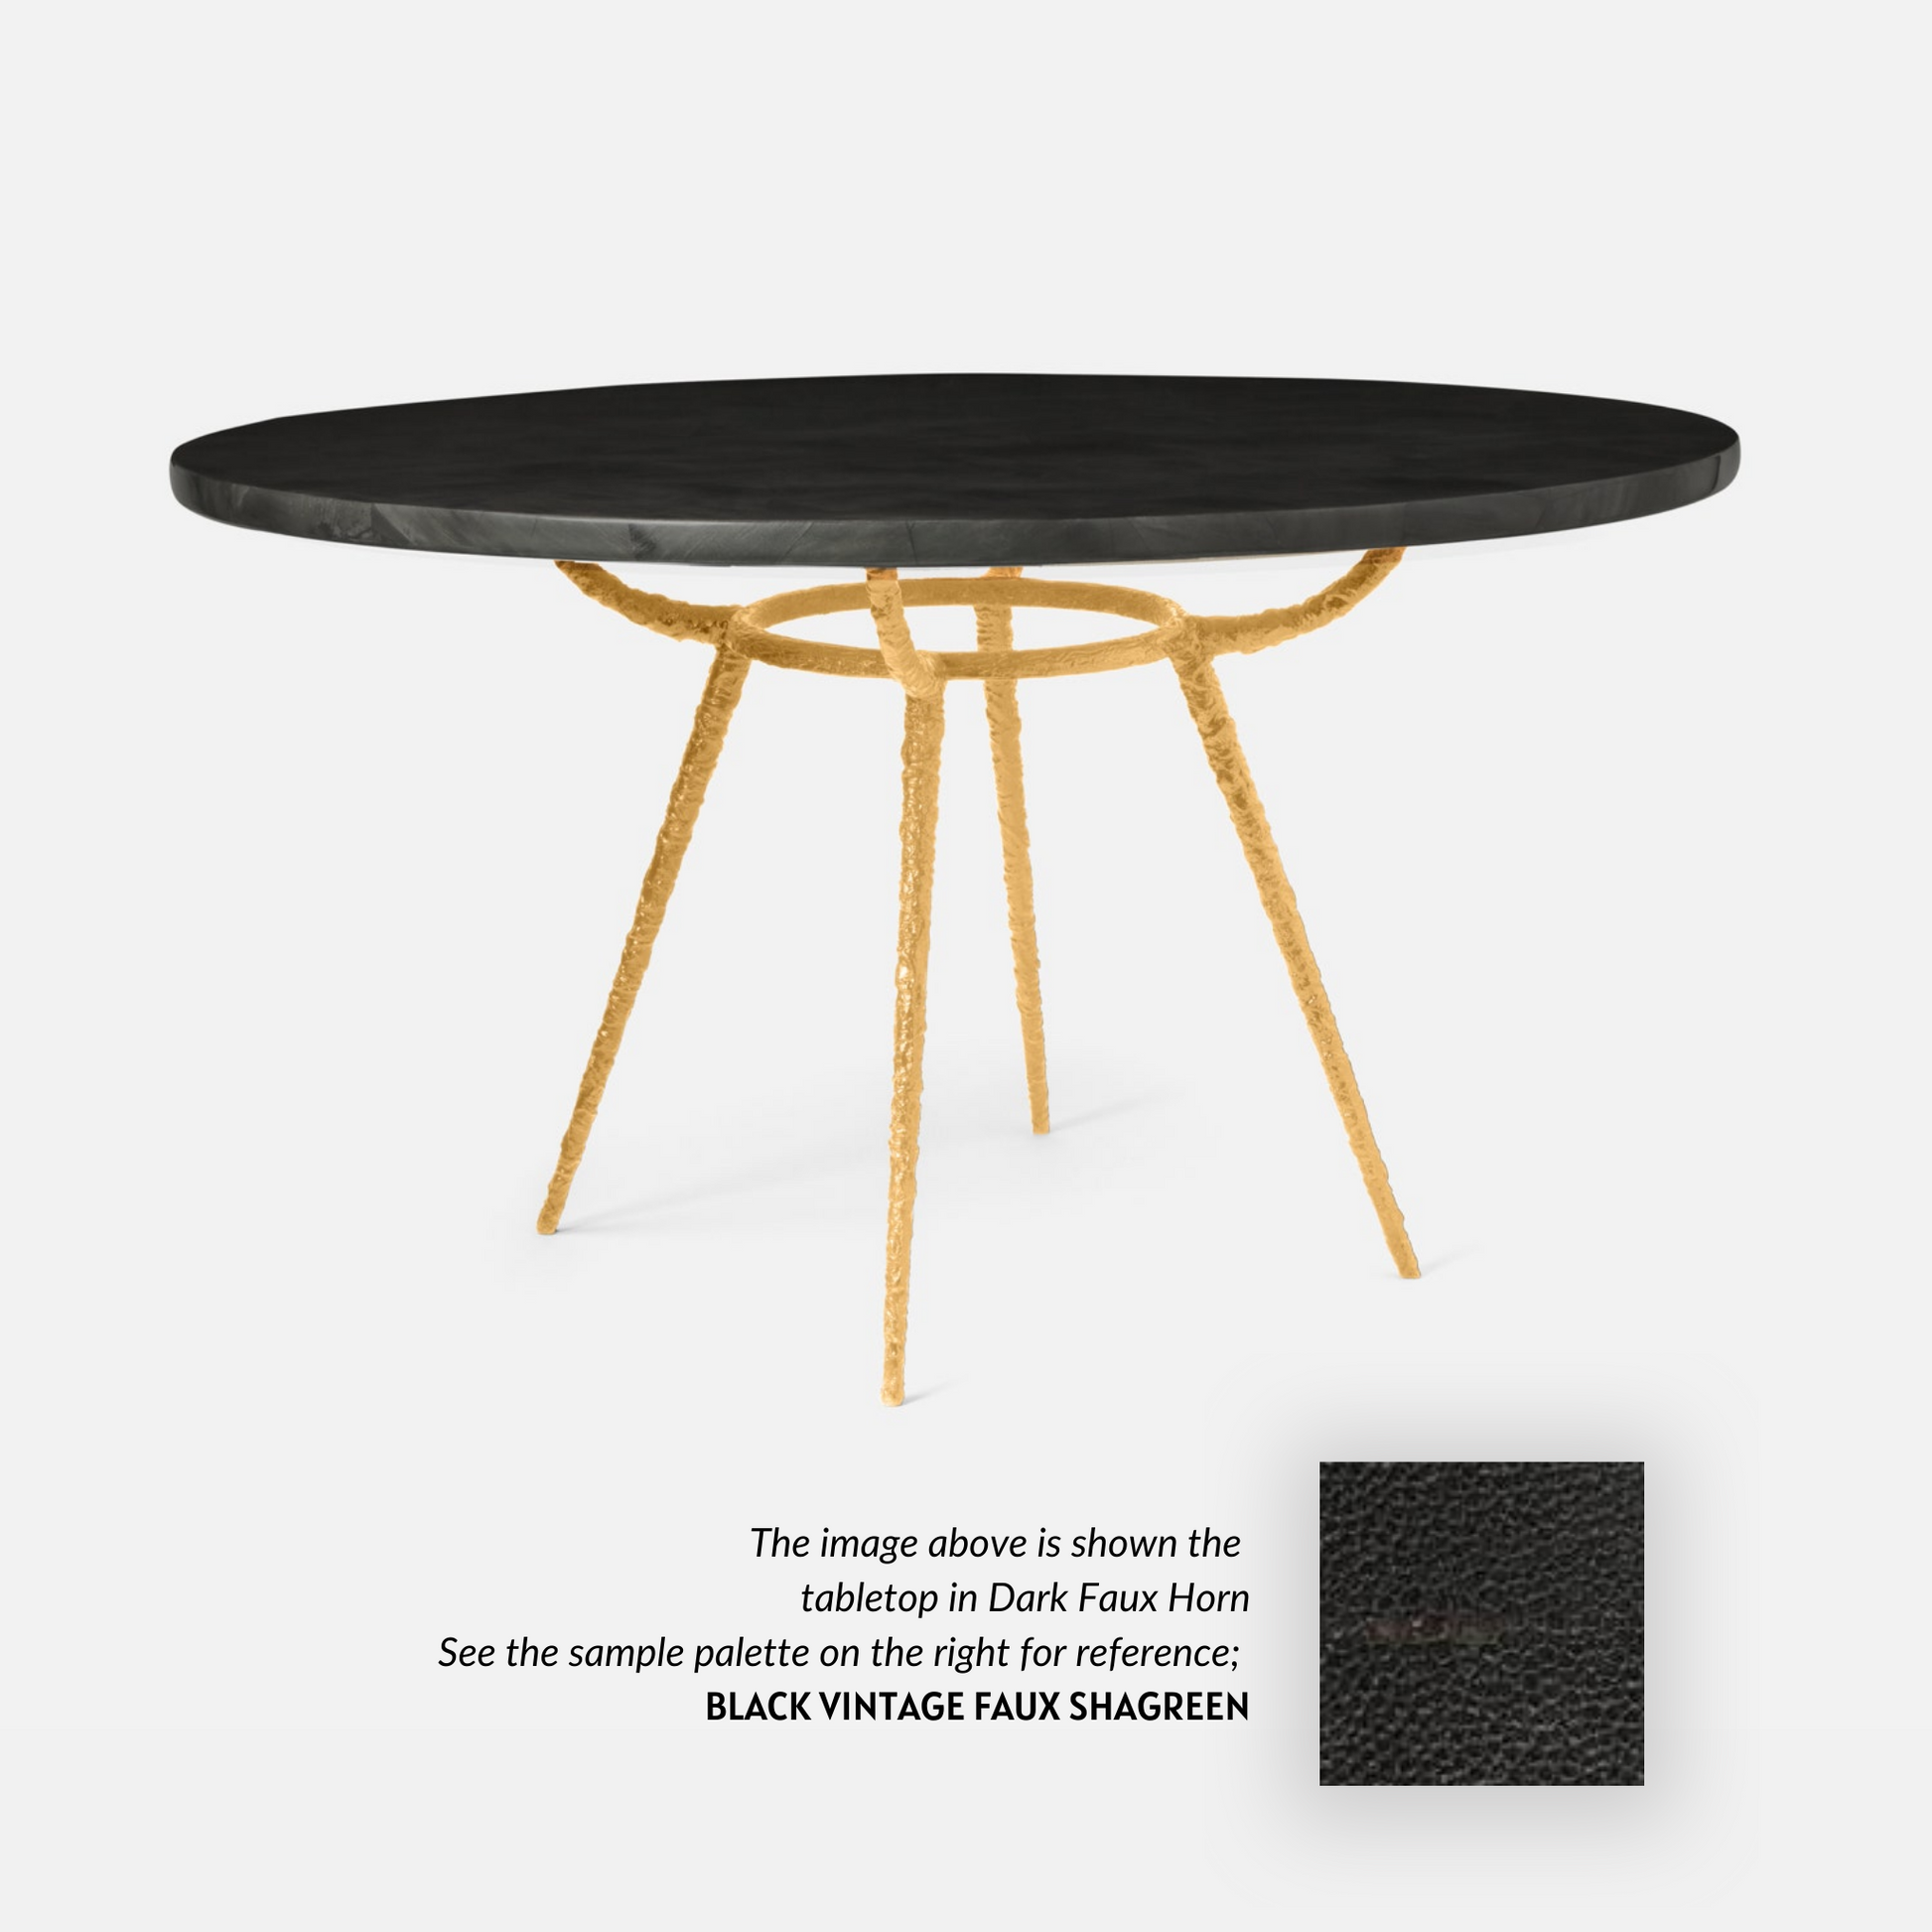 Made Goods Grace 72" x 30" Gold Pitted Iron Dinning Table With Round Black Vintage Faux Shagreen Table Top